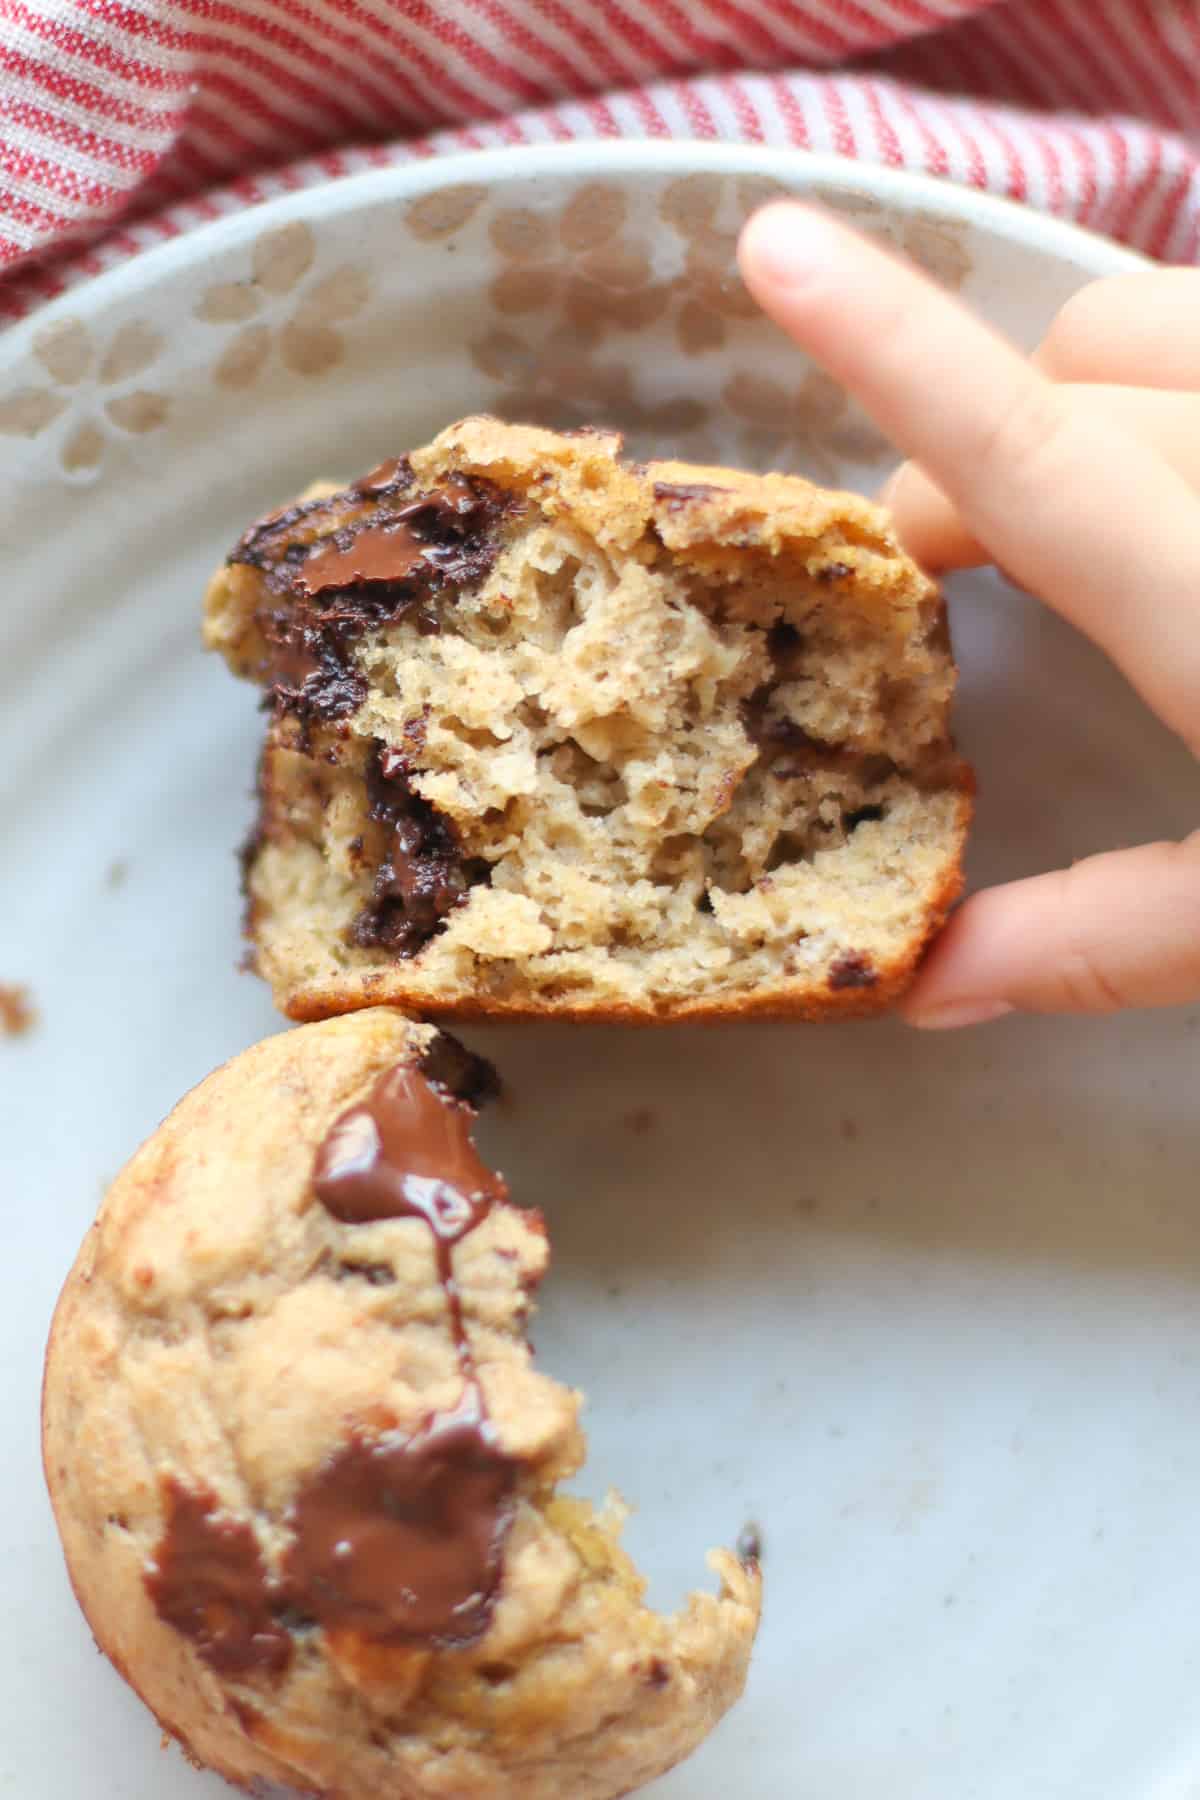 A baked muffin torn apart showing the inside on a plate.